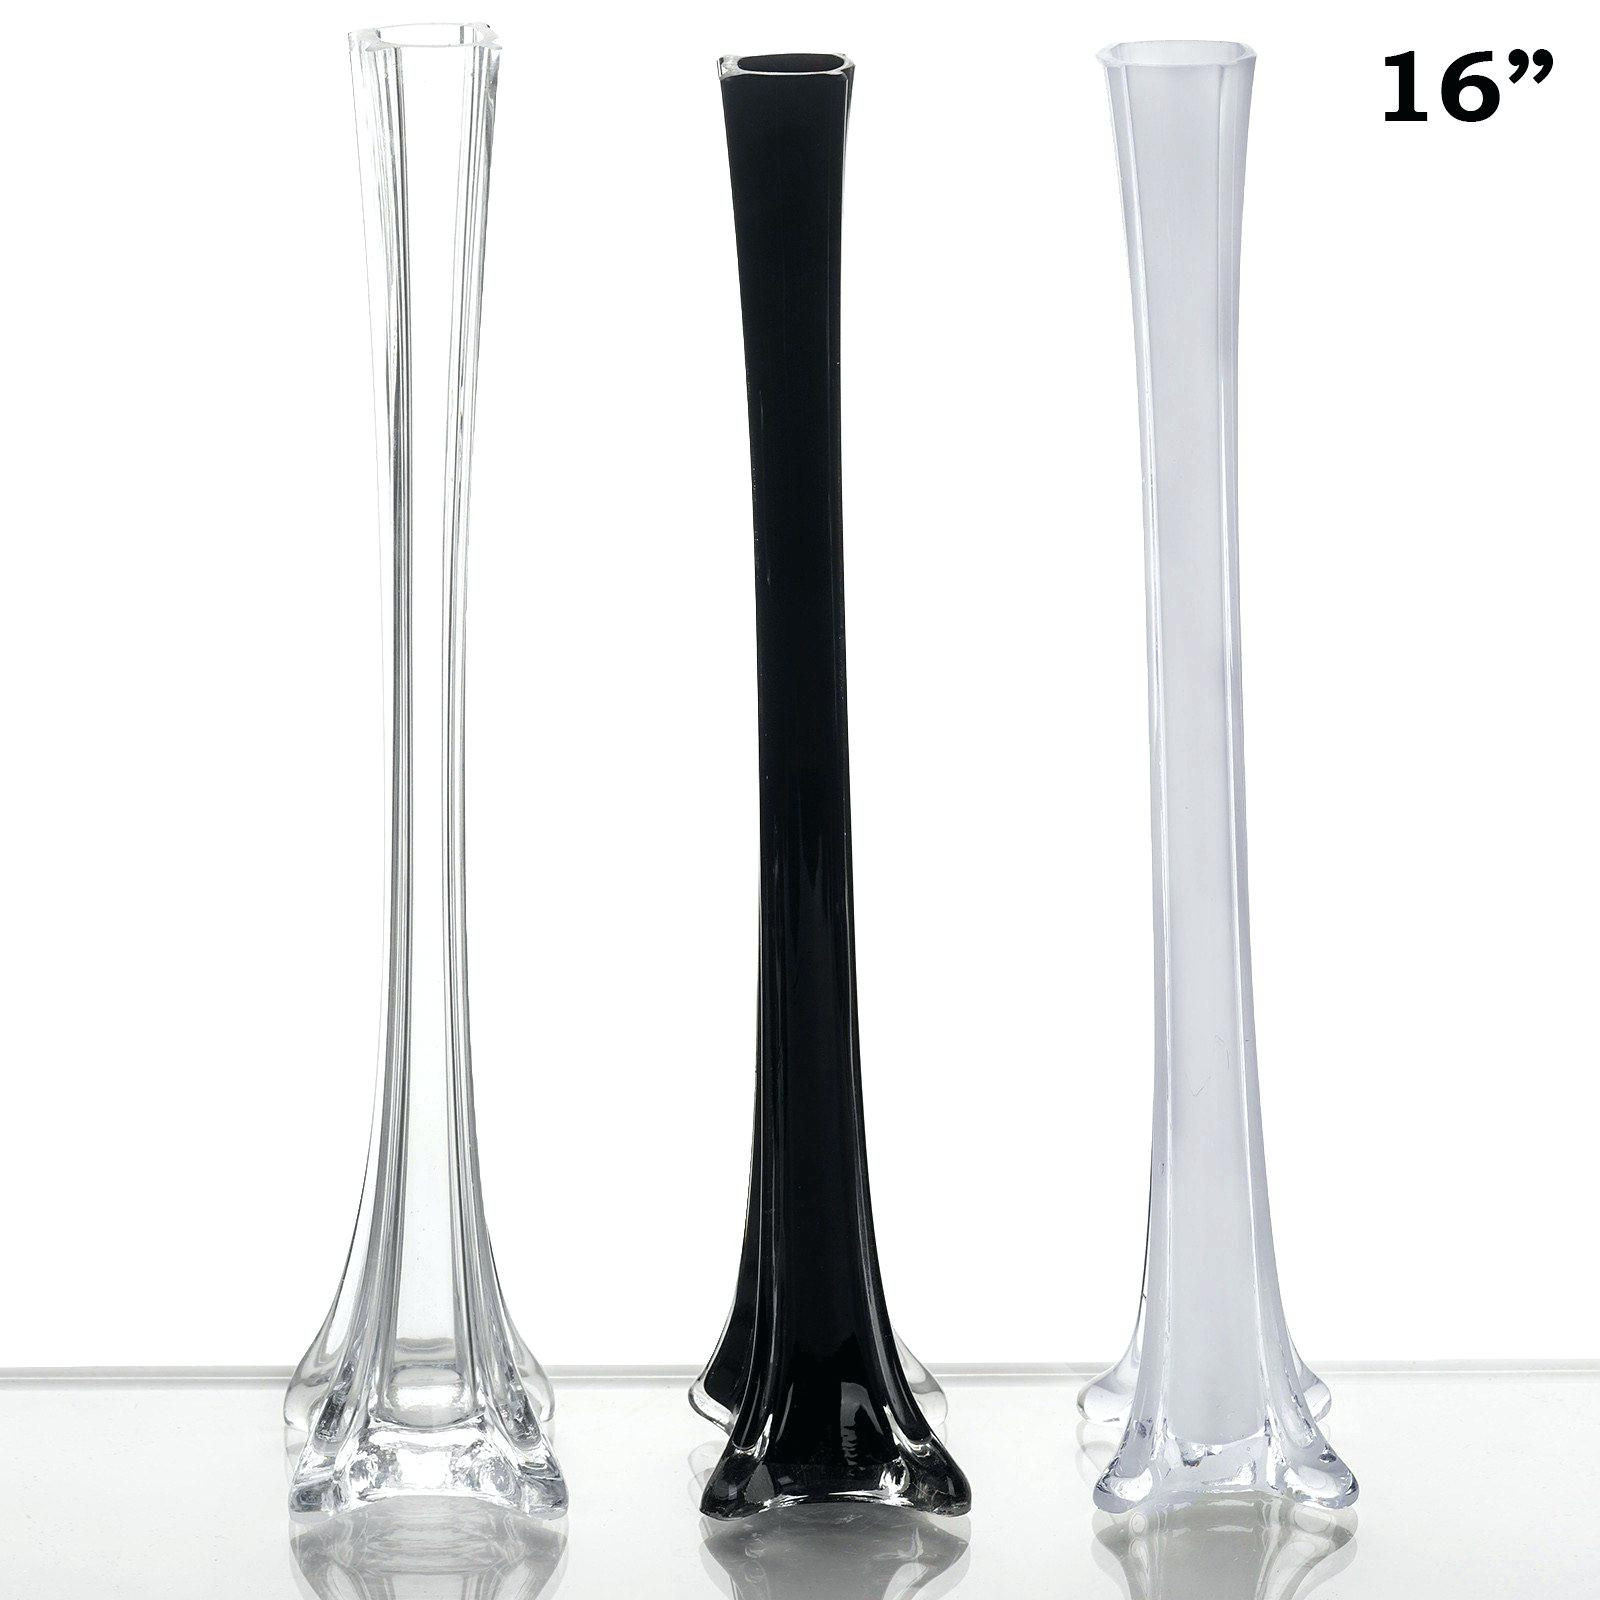 tall plastic cylinder vases for cheap of 40 glass vases bulk the weekly world pertaining to gallery plastic eiffel tower vases wholesale drawings art gallery